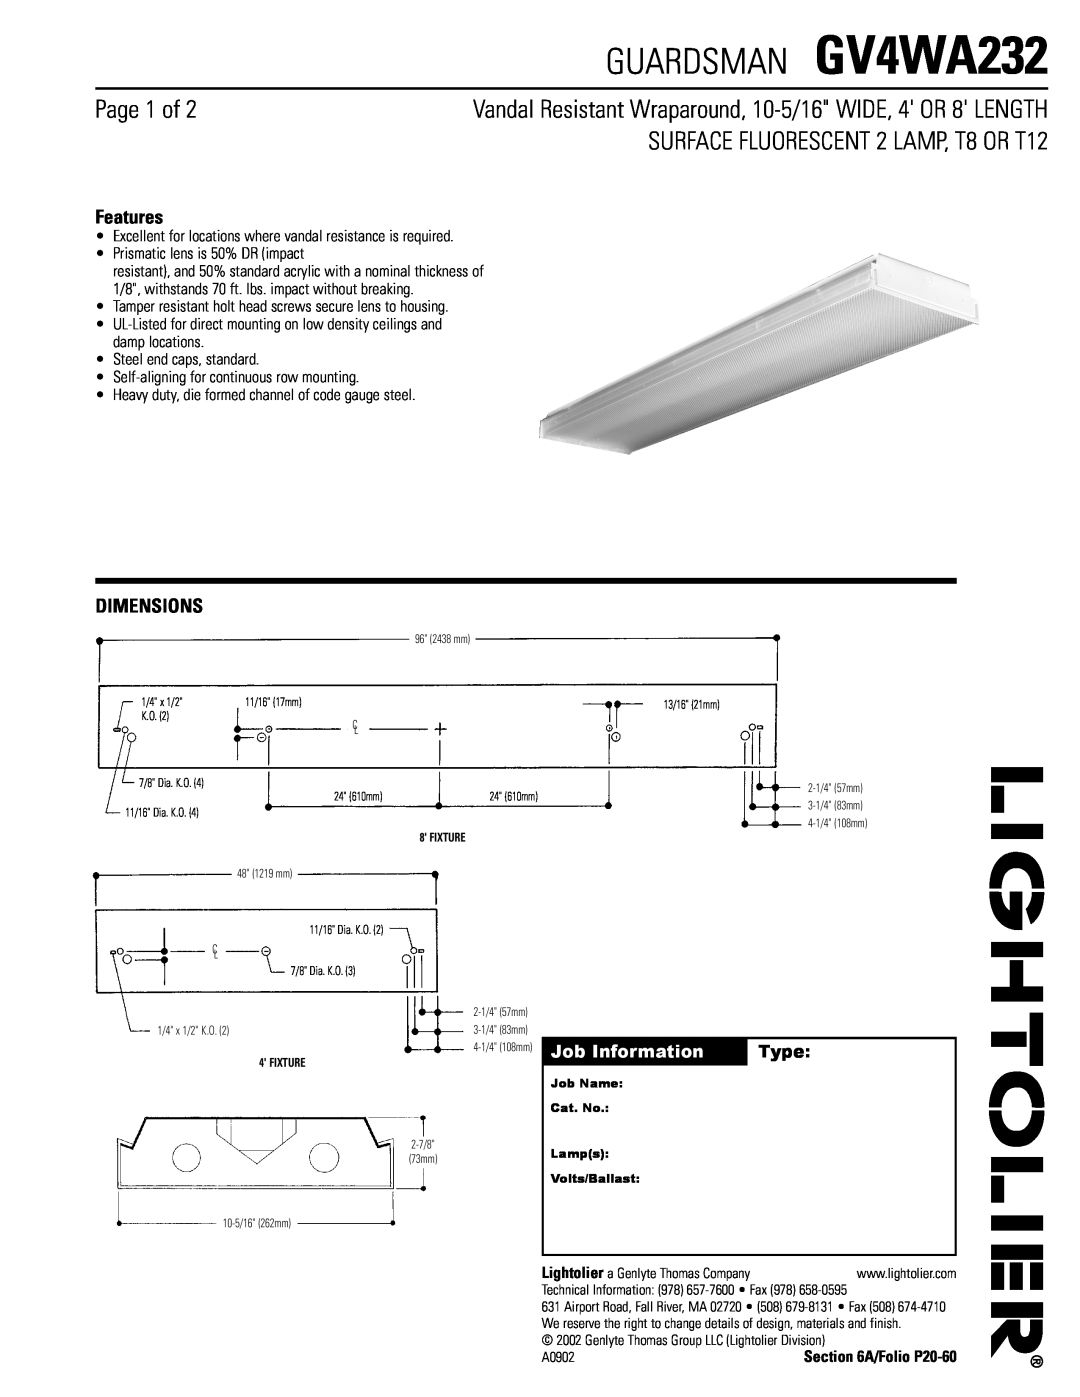 Lightolier dimensions Features, Dimensions, Job Information, Type, GUARDSMAN GV4WA232, Page 1 of 